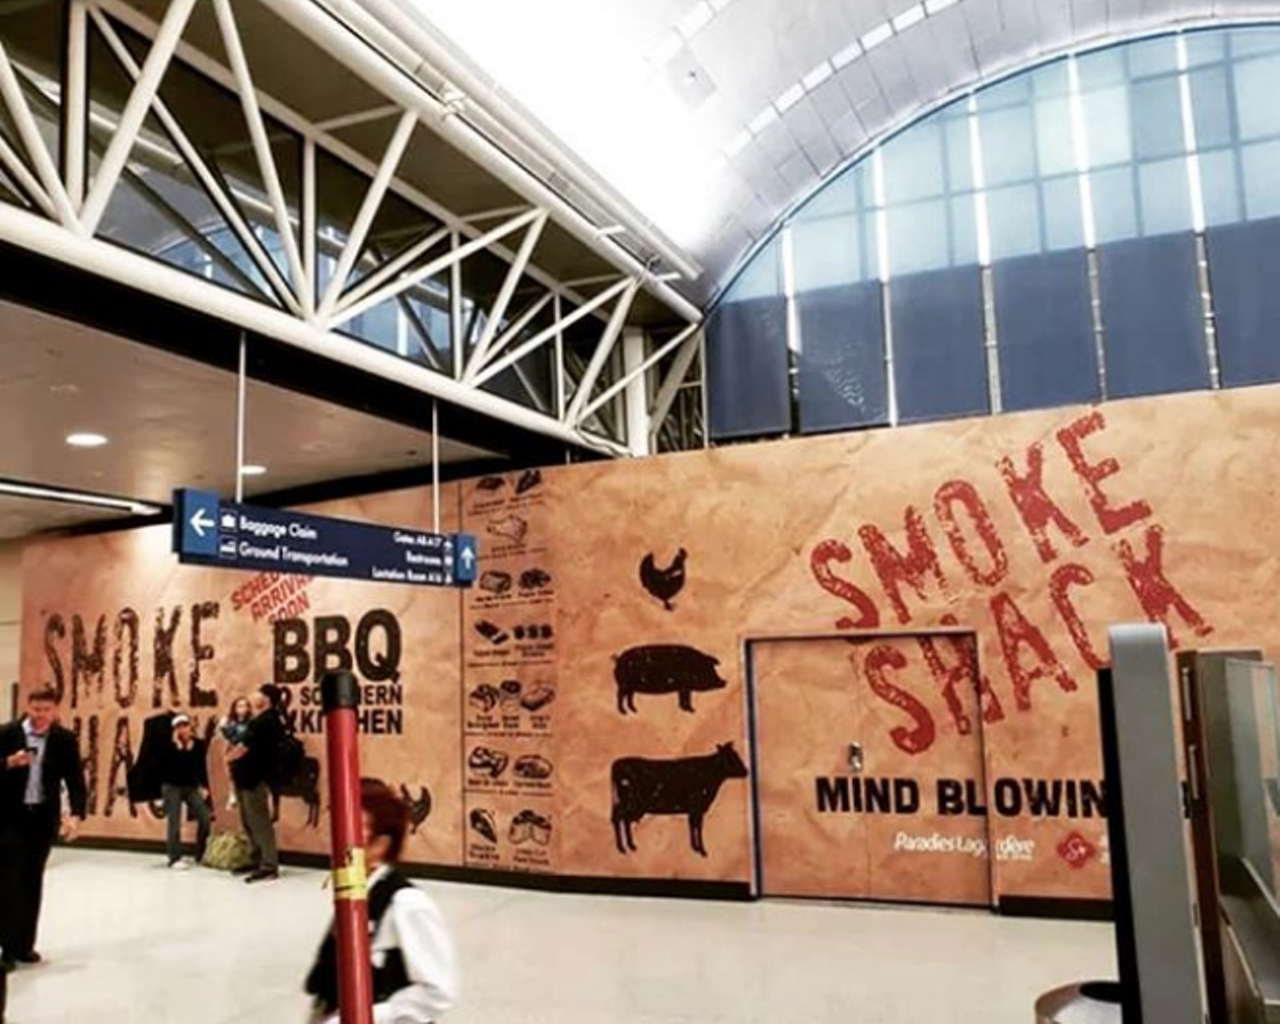 Smoke Shack BBQ
You don’t have to travel far for great Texas barbecue. Chris Conger’s Broadway restaurant Smoke Shack is slated to bring brews, BBQ and a full bar to San Antonio International Airport in 2020. Expect to see favorites from both the OG Smoke Shack and sister bar The Pigpen for breakfast, lunch and dinner.
Photo via Instagram / smokeshack